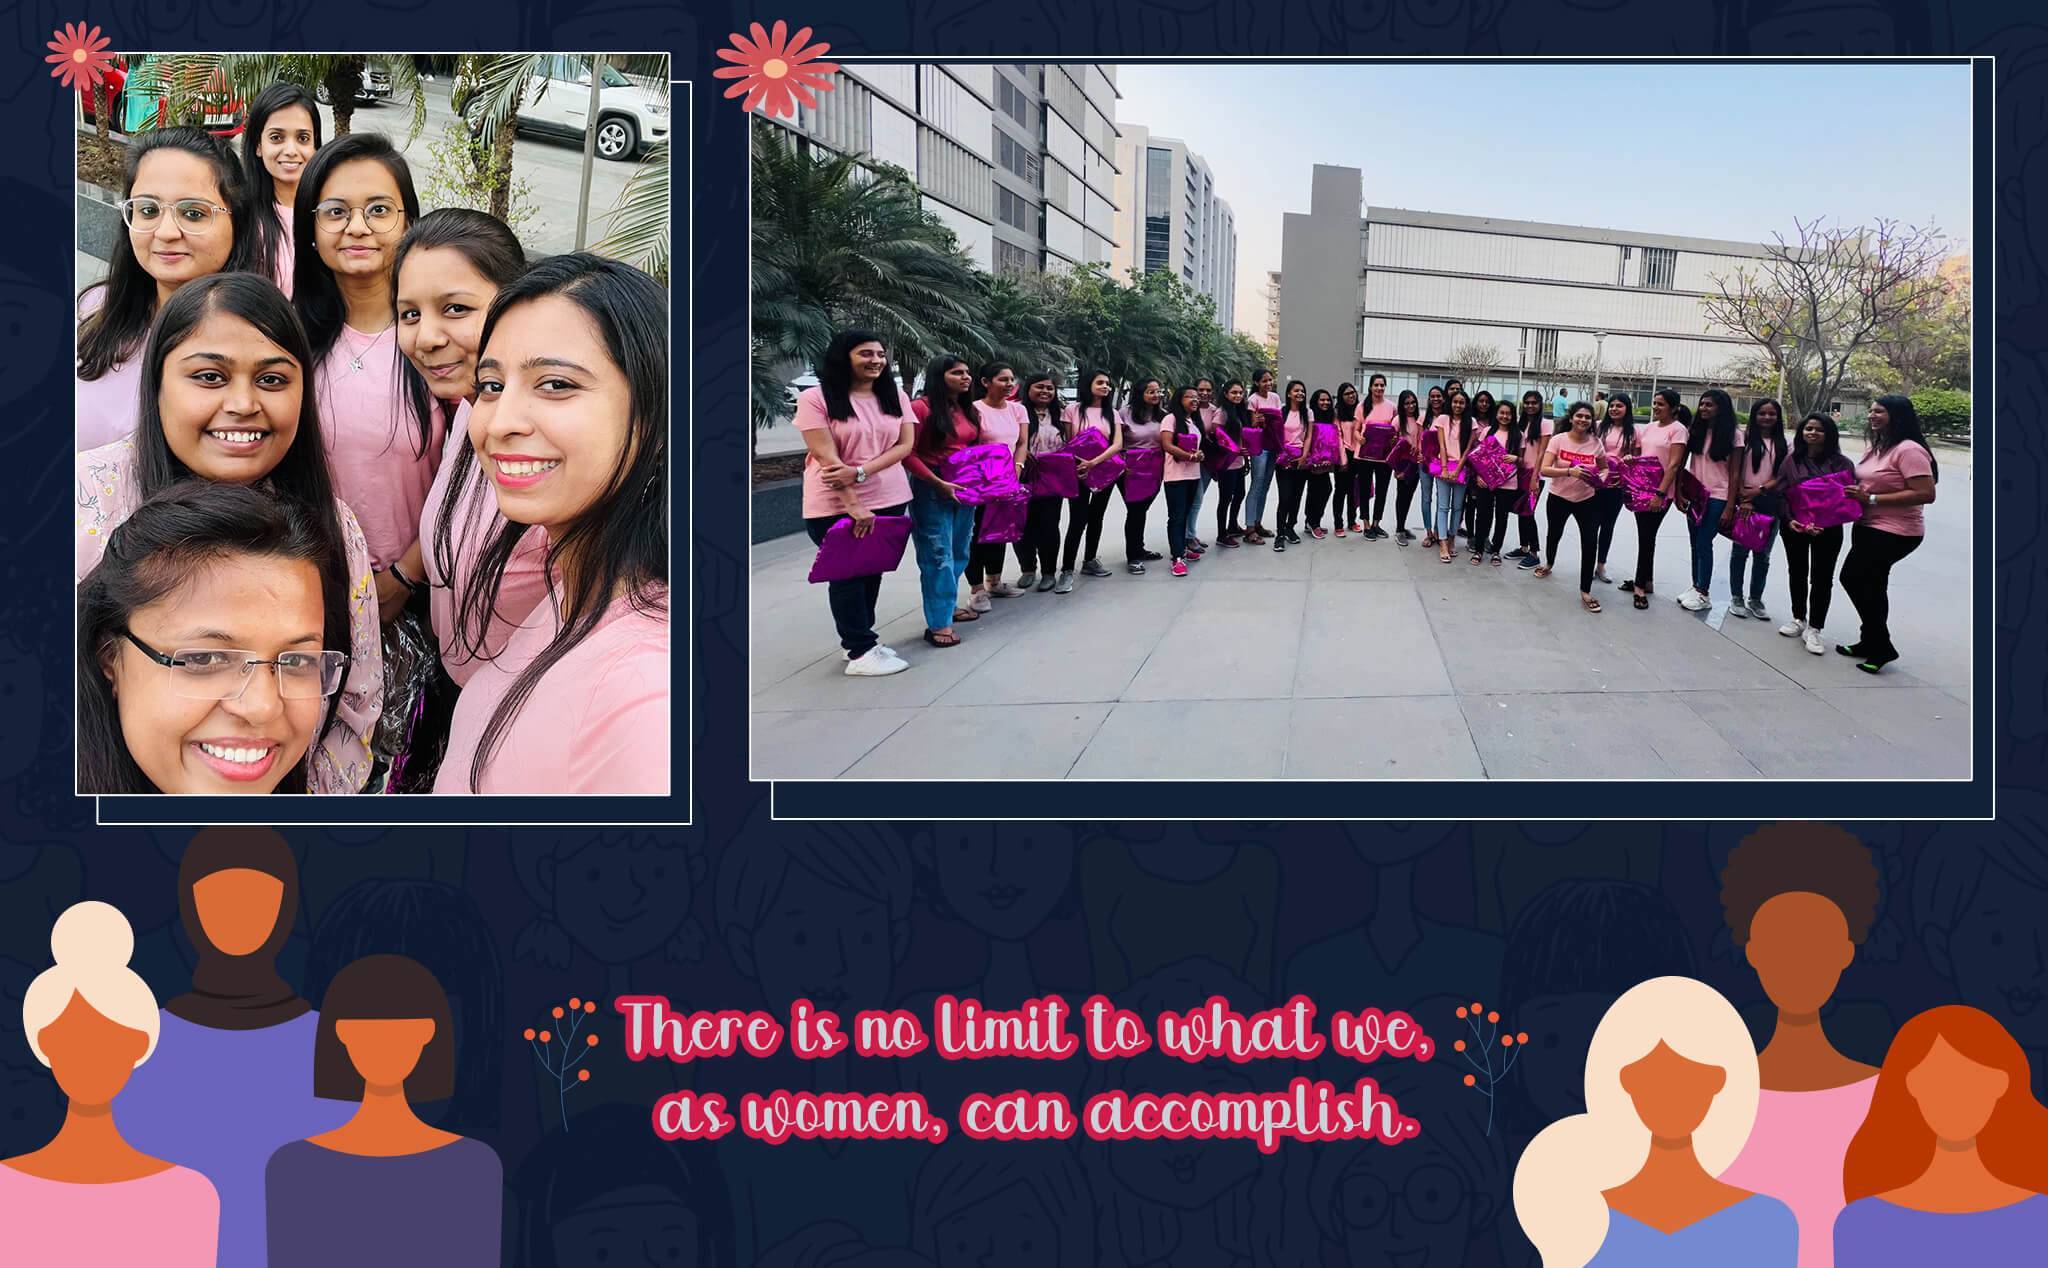 It's March 8, a day to respect and recognize women's achievements across the world. Silicon salutes female team members for their contribution and dedication.